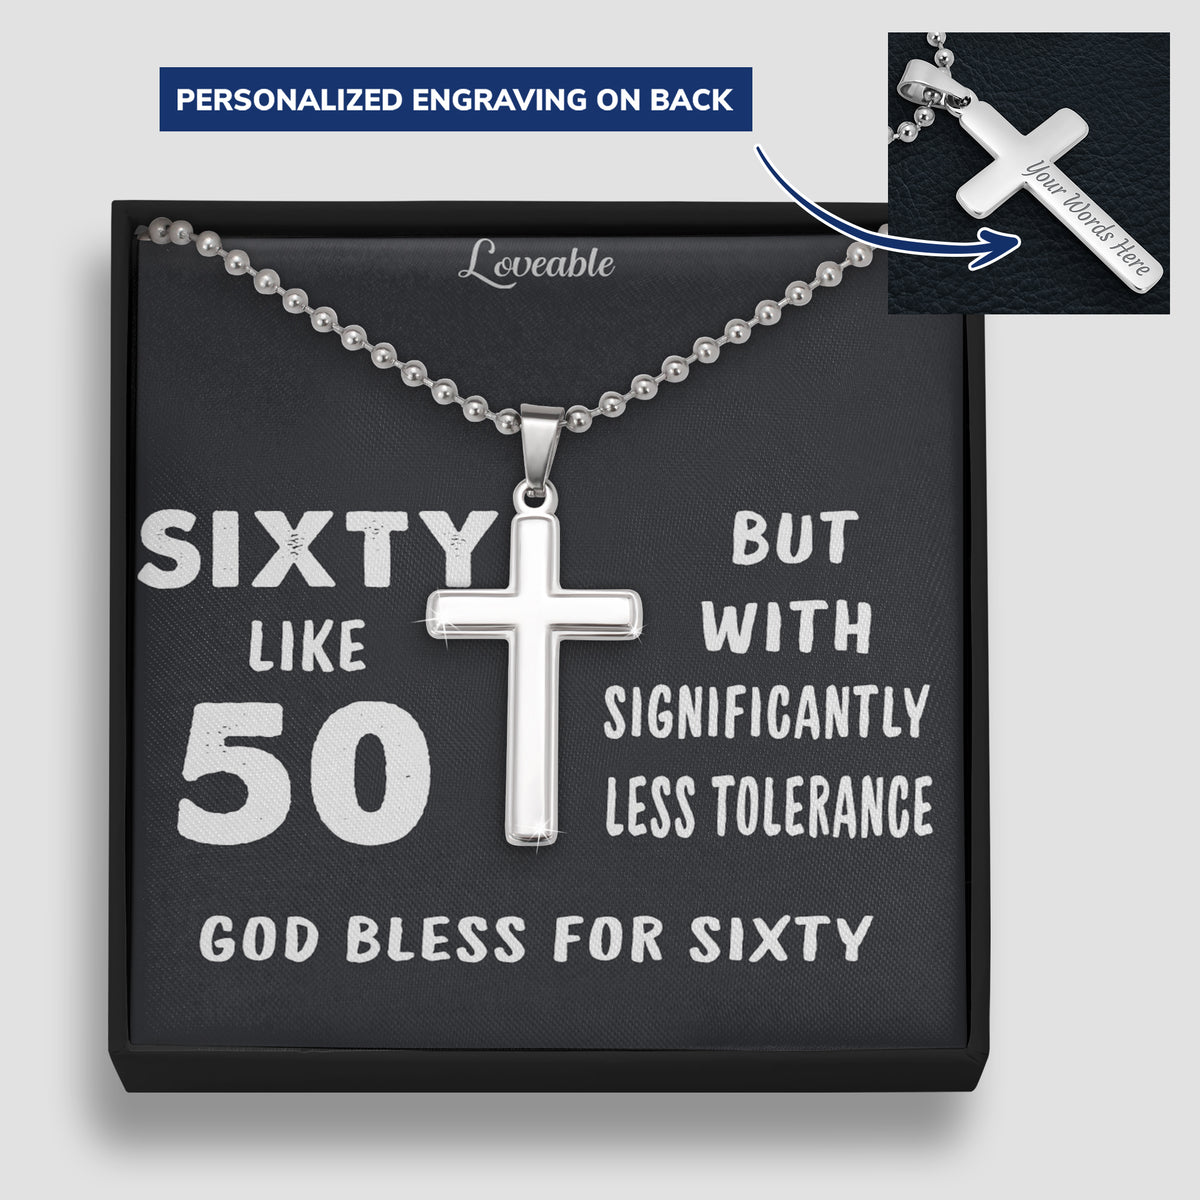 God Bless for Sixty - Stainless Steel Cross Necklace - 60th Birthday Gift for Him